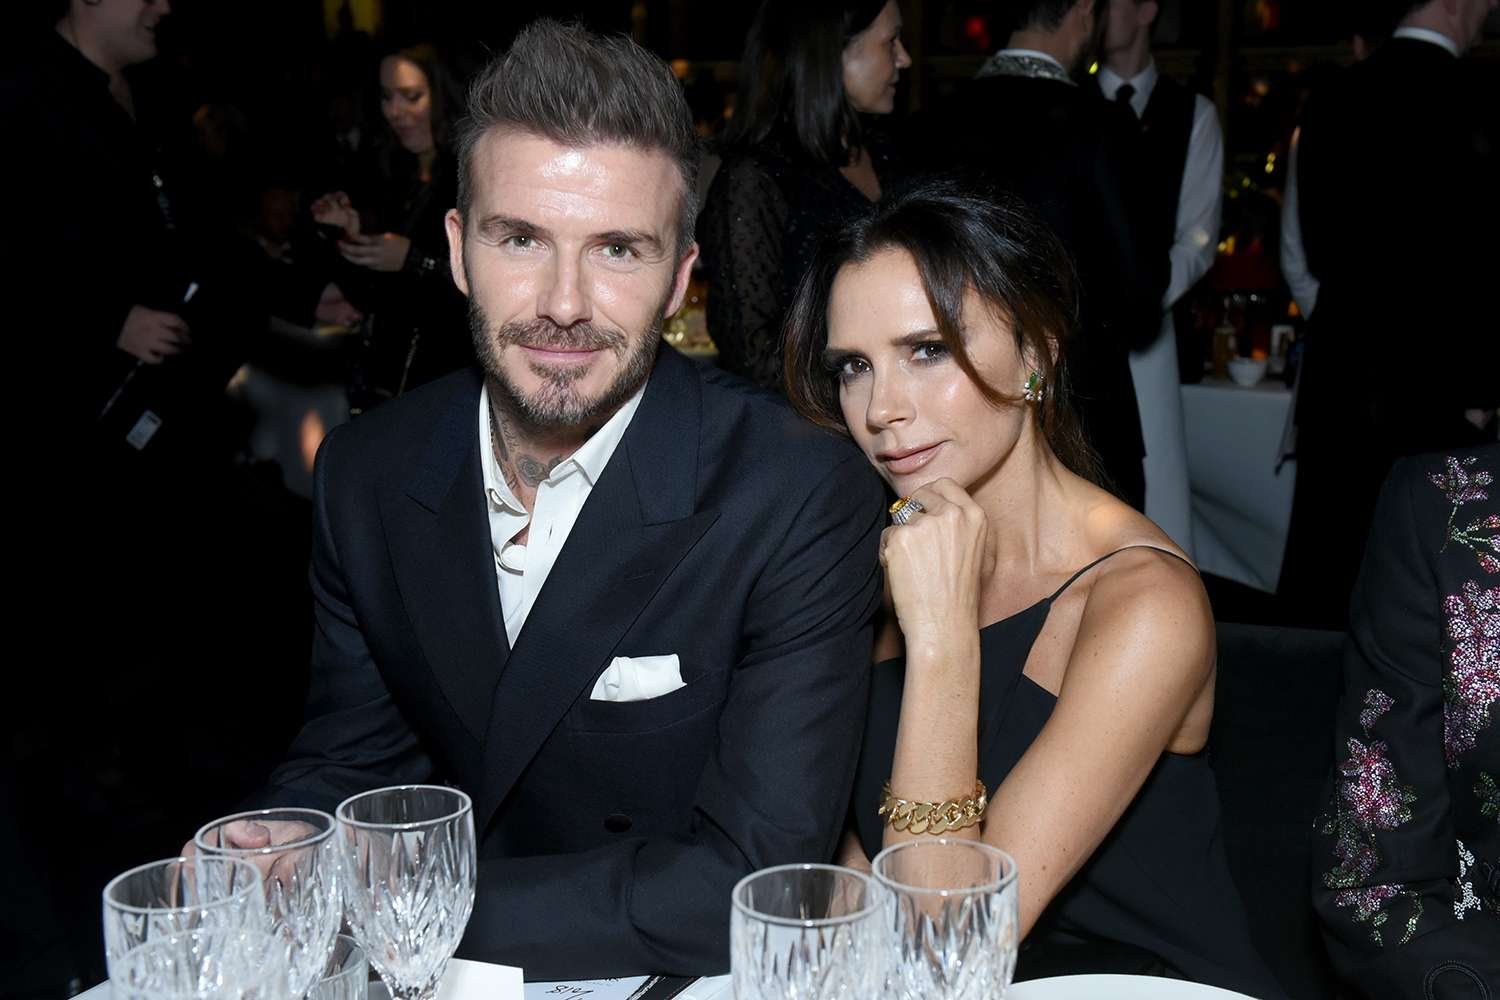 David Beckham Celebrates 'Beautiful Wife' Victoria on Her 50th Birthday: ‘We All Love You So Much’